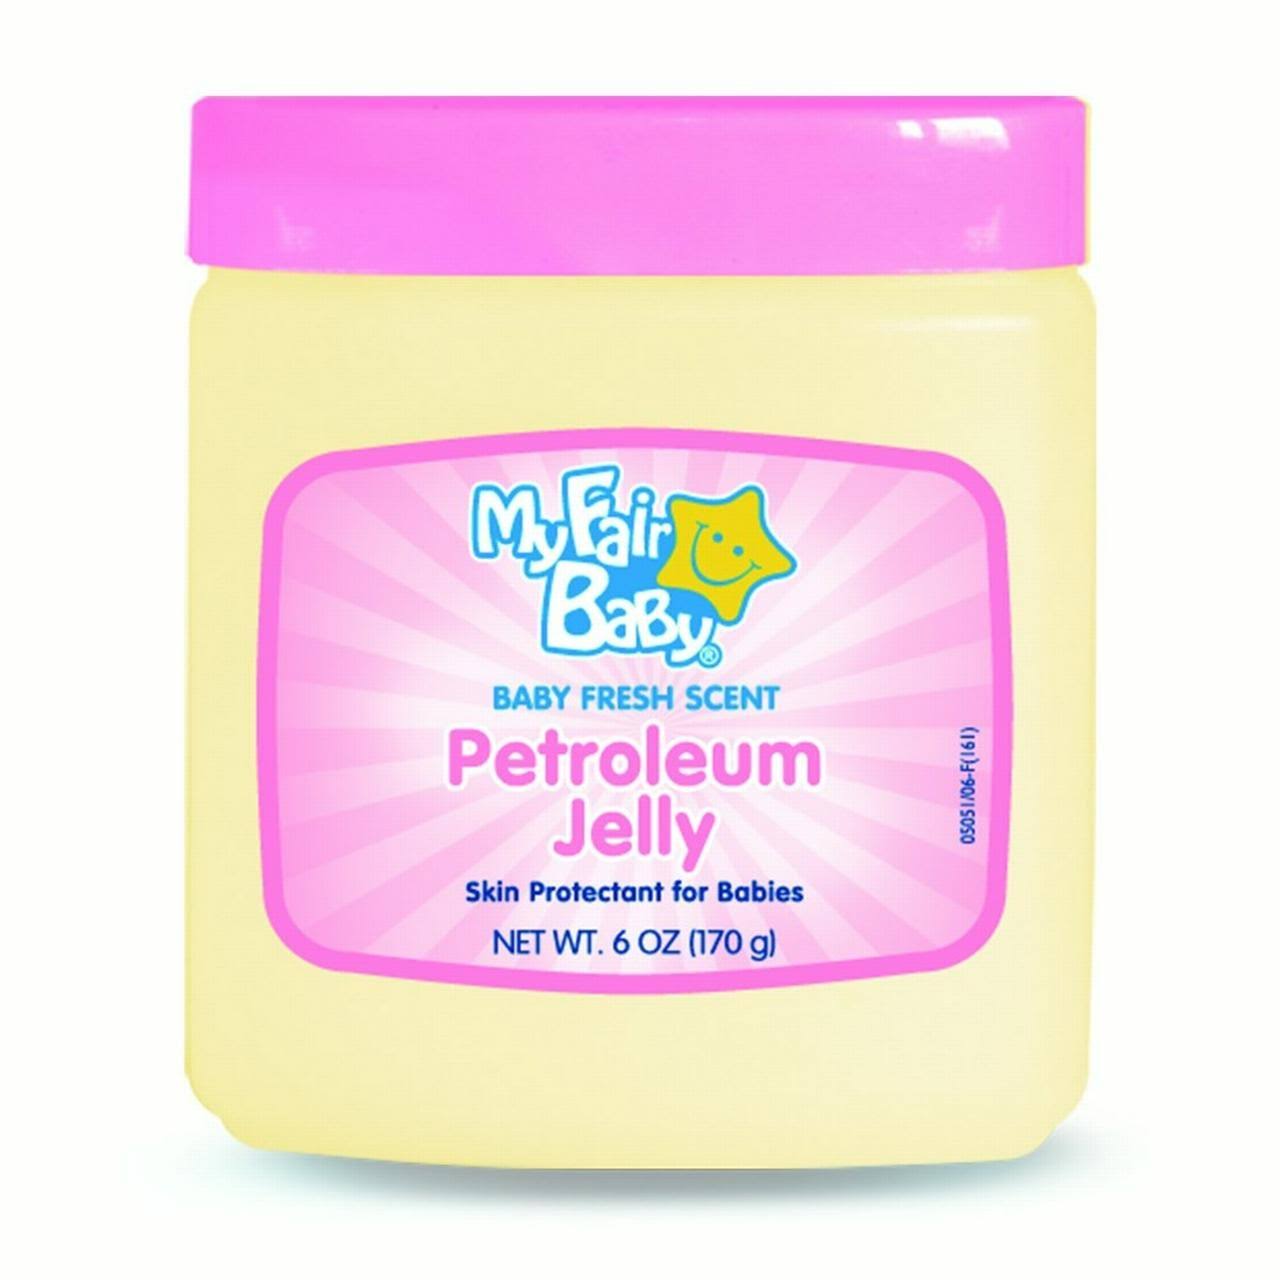 My Fair Baby Petroleum Jelly - Baby Scent, 6 oz